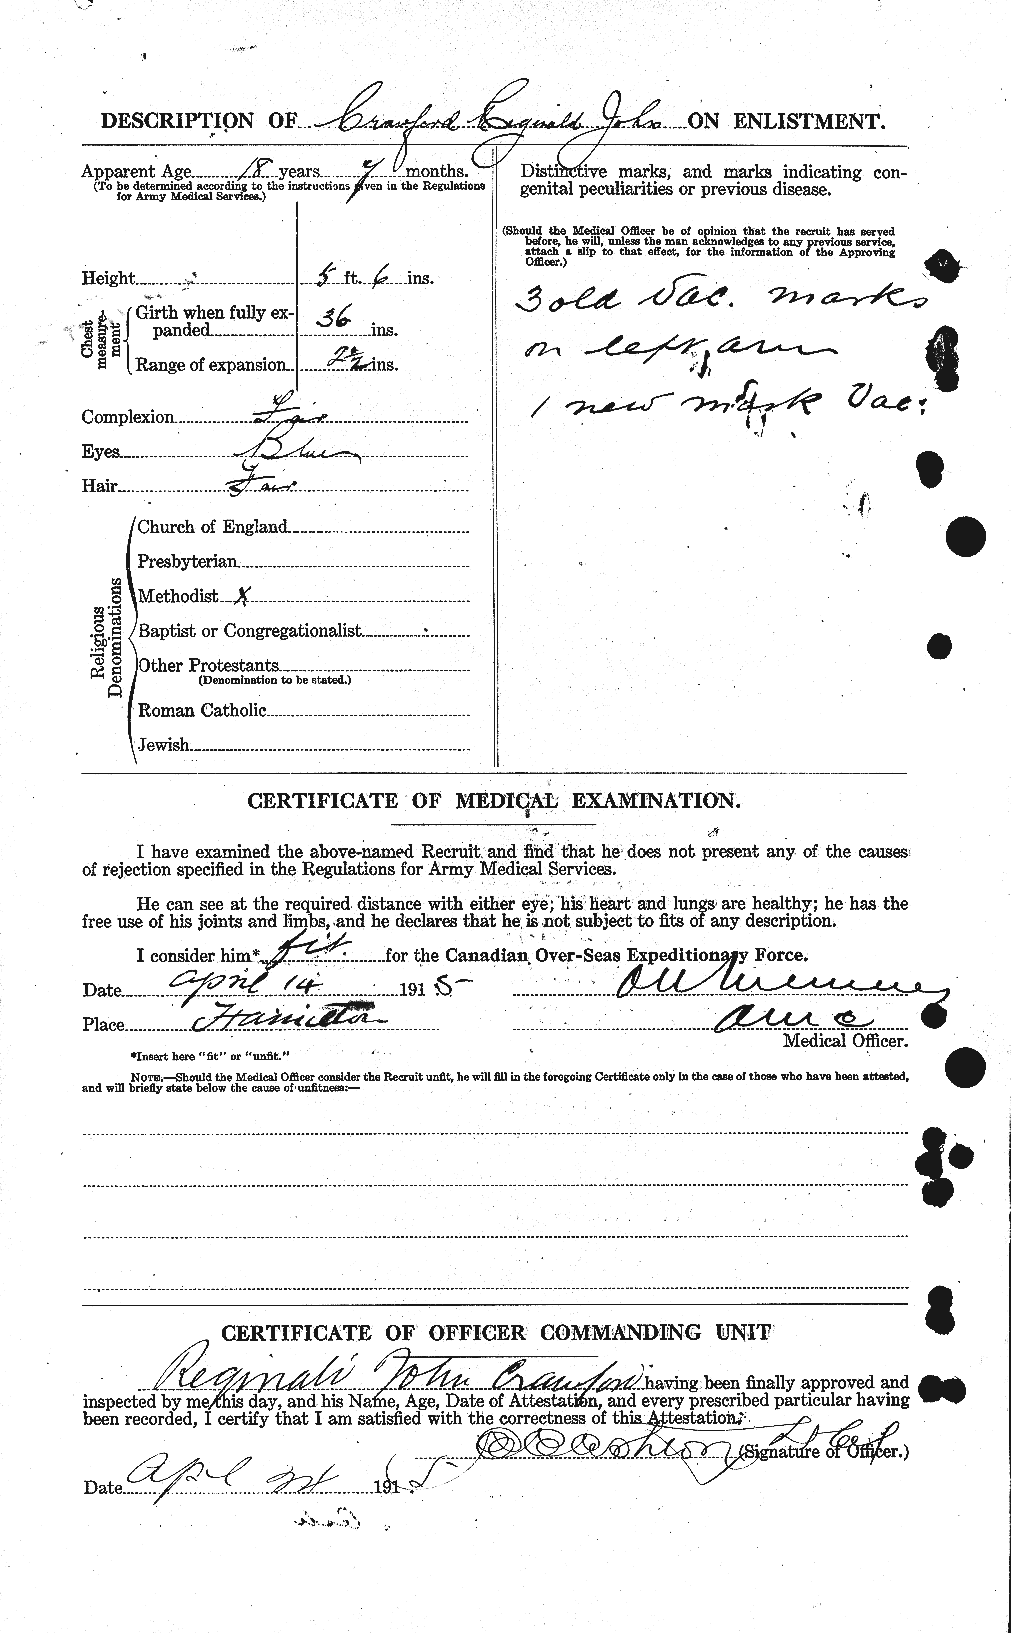 Personnel Records of the First World War - CEF 061647b